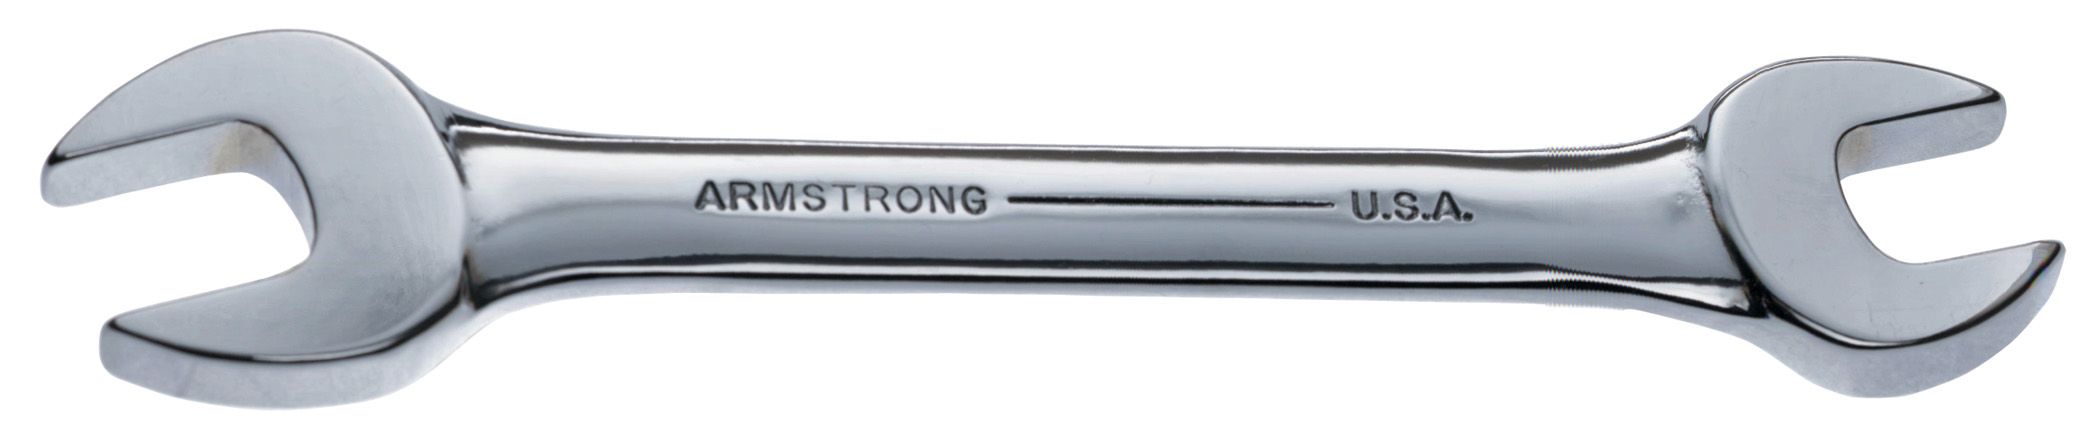 Armstrong 1/2 x 9/16 Full Polish Open End Wrench